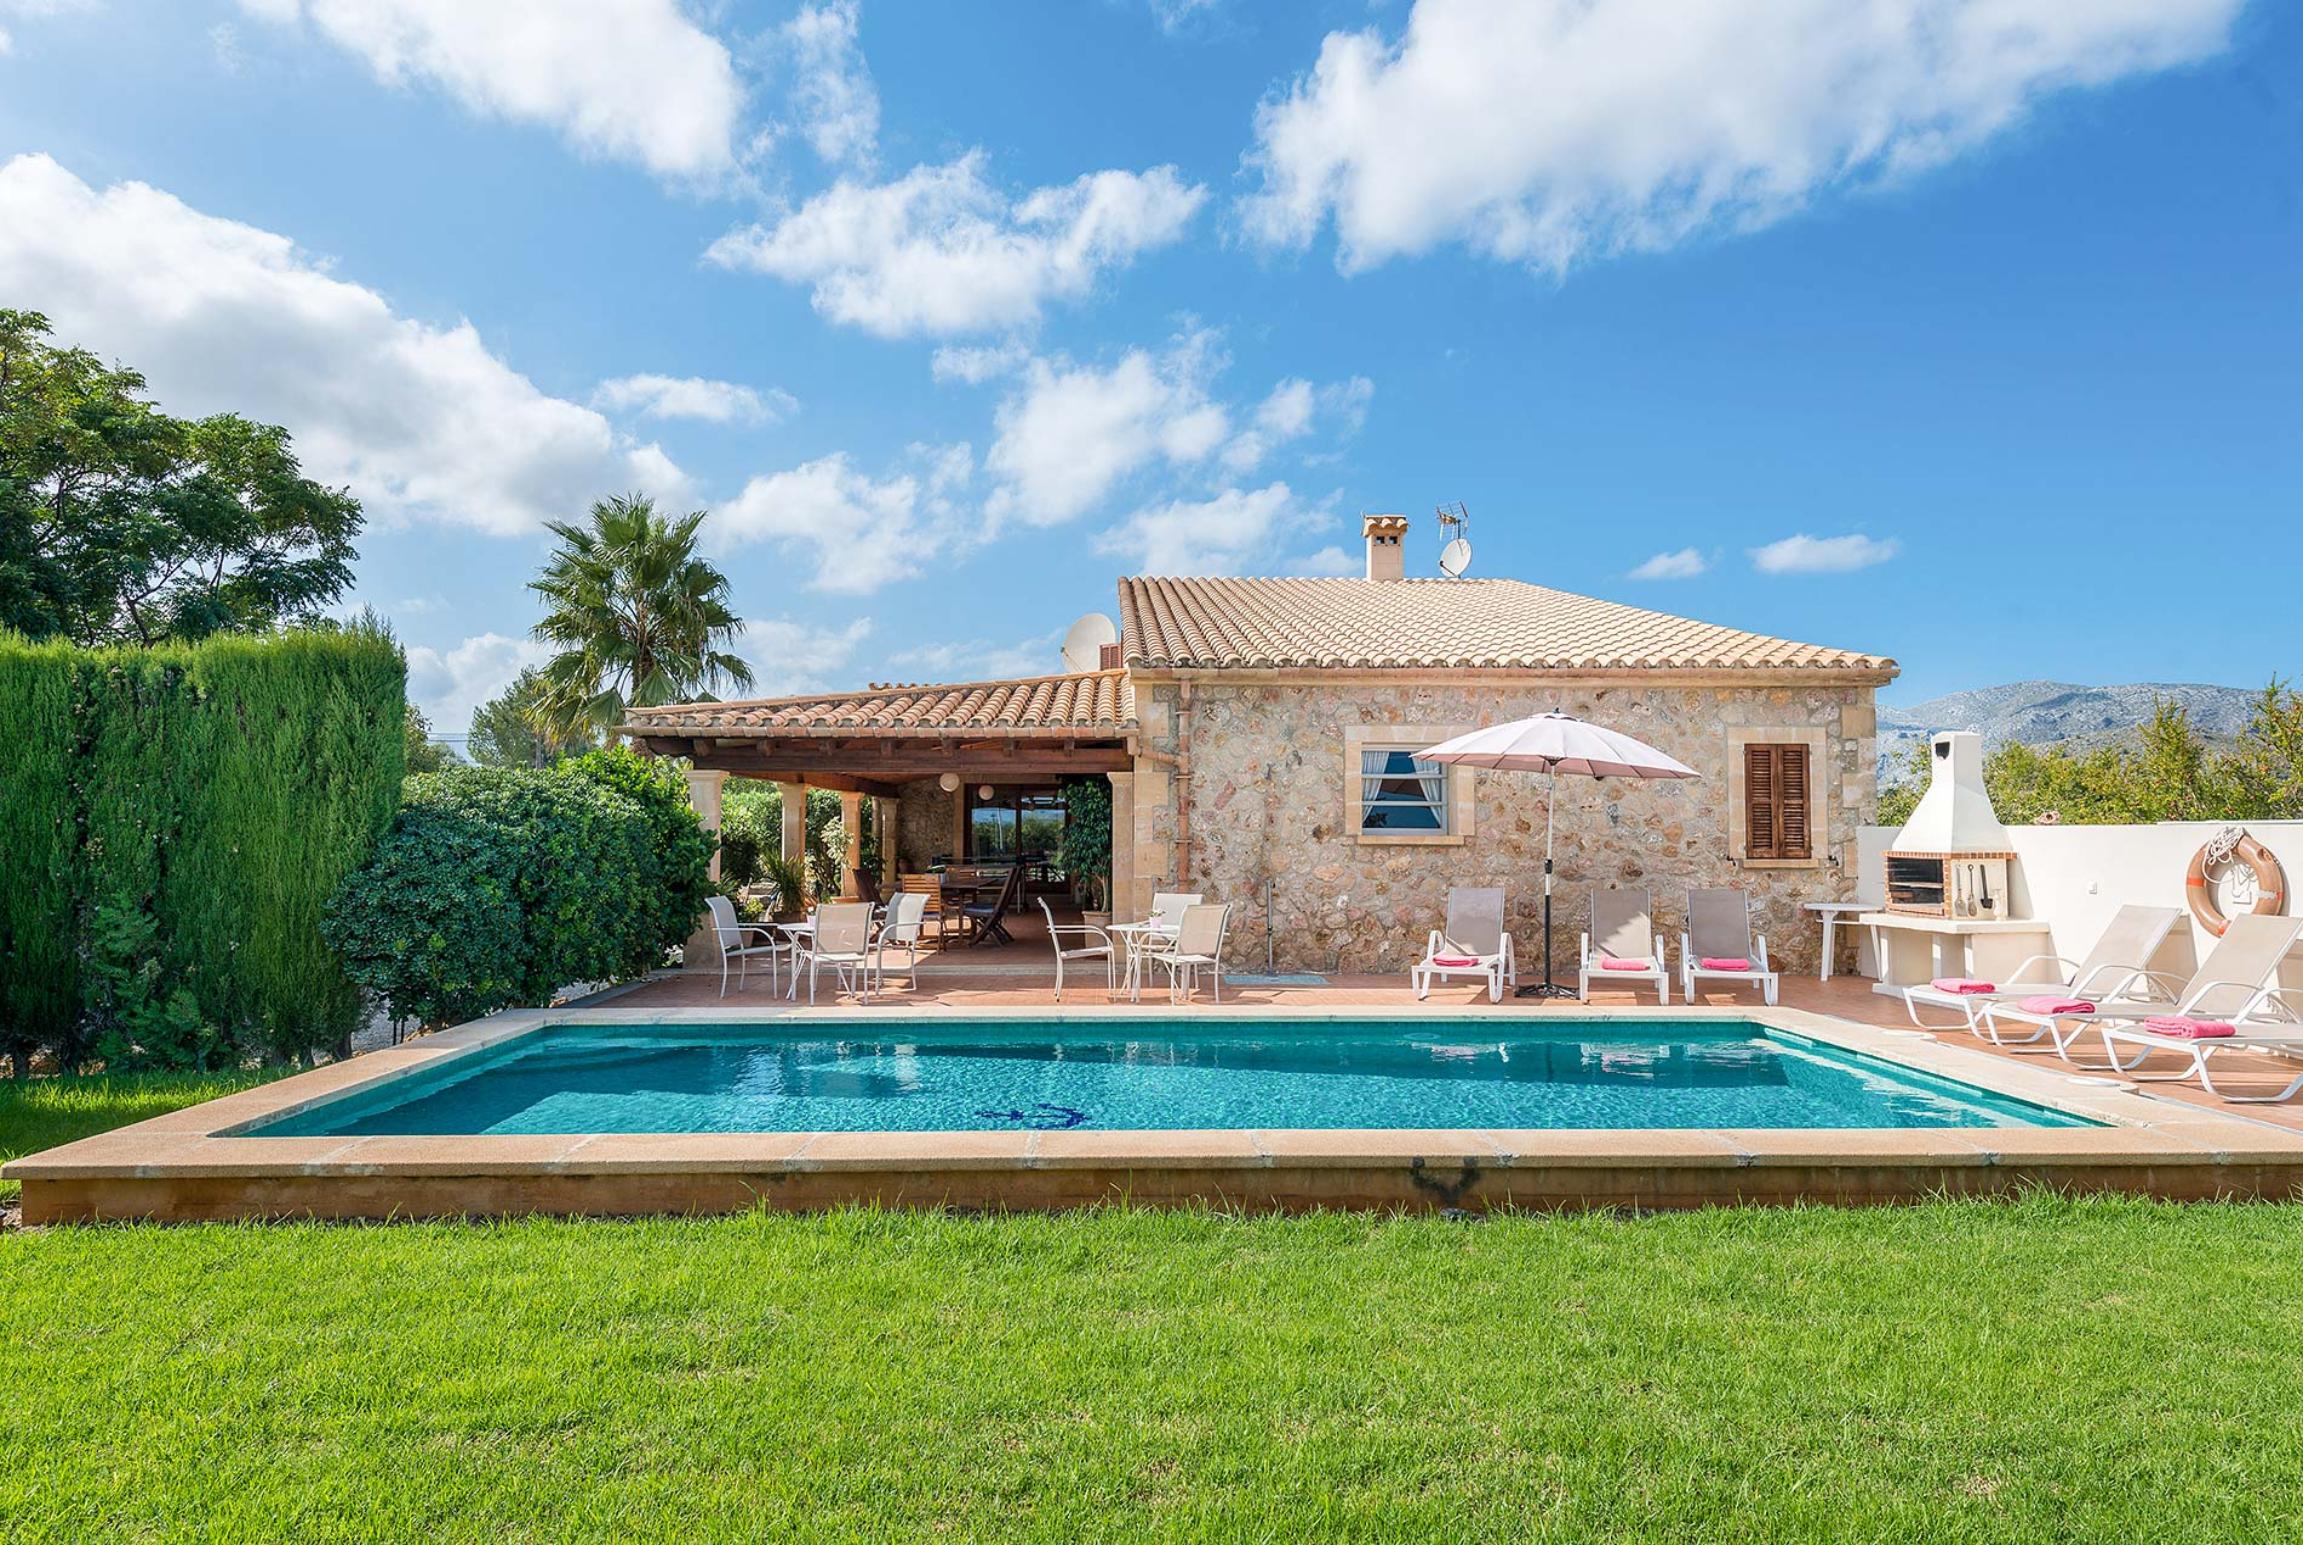 Property Image 1 - Attractive Villa in Pollensan Countryside with Pool